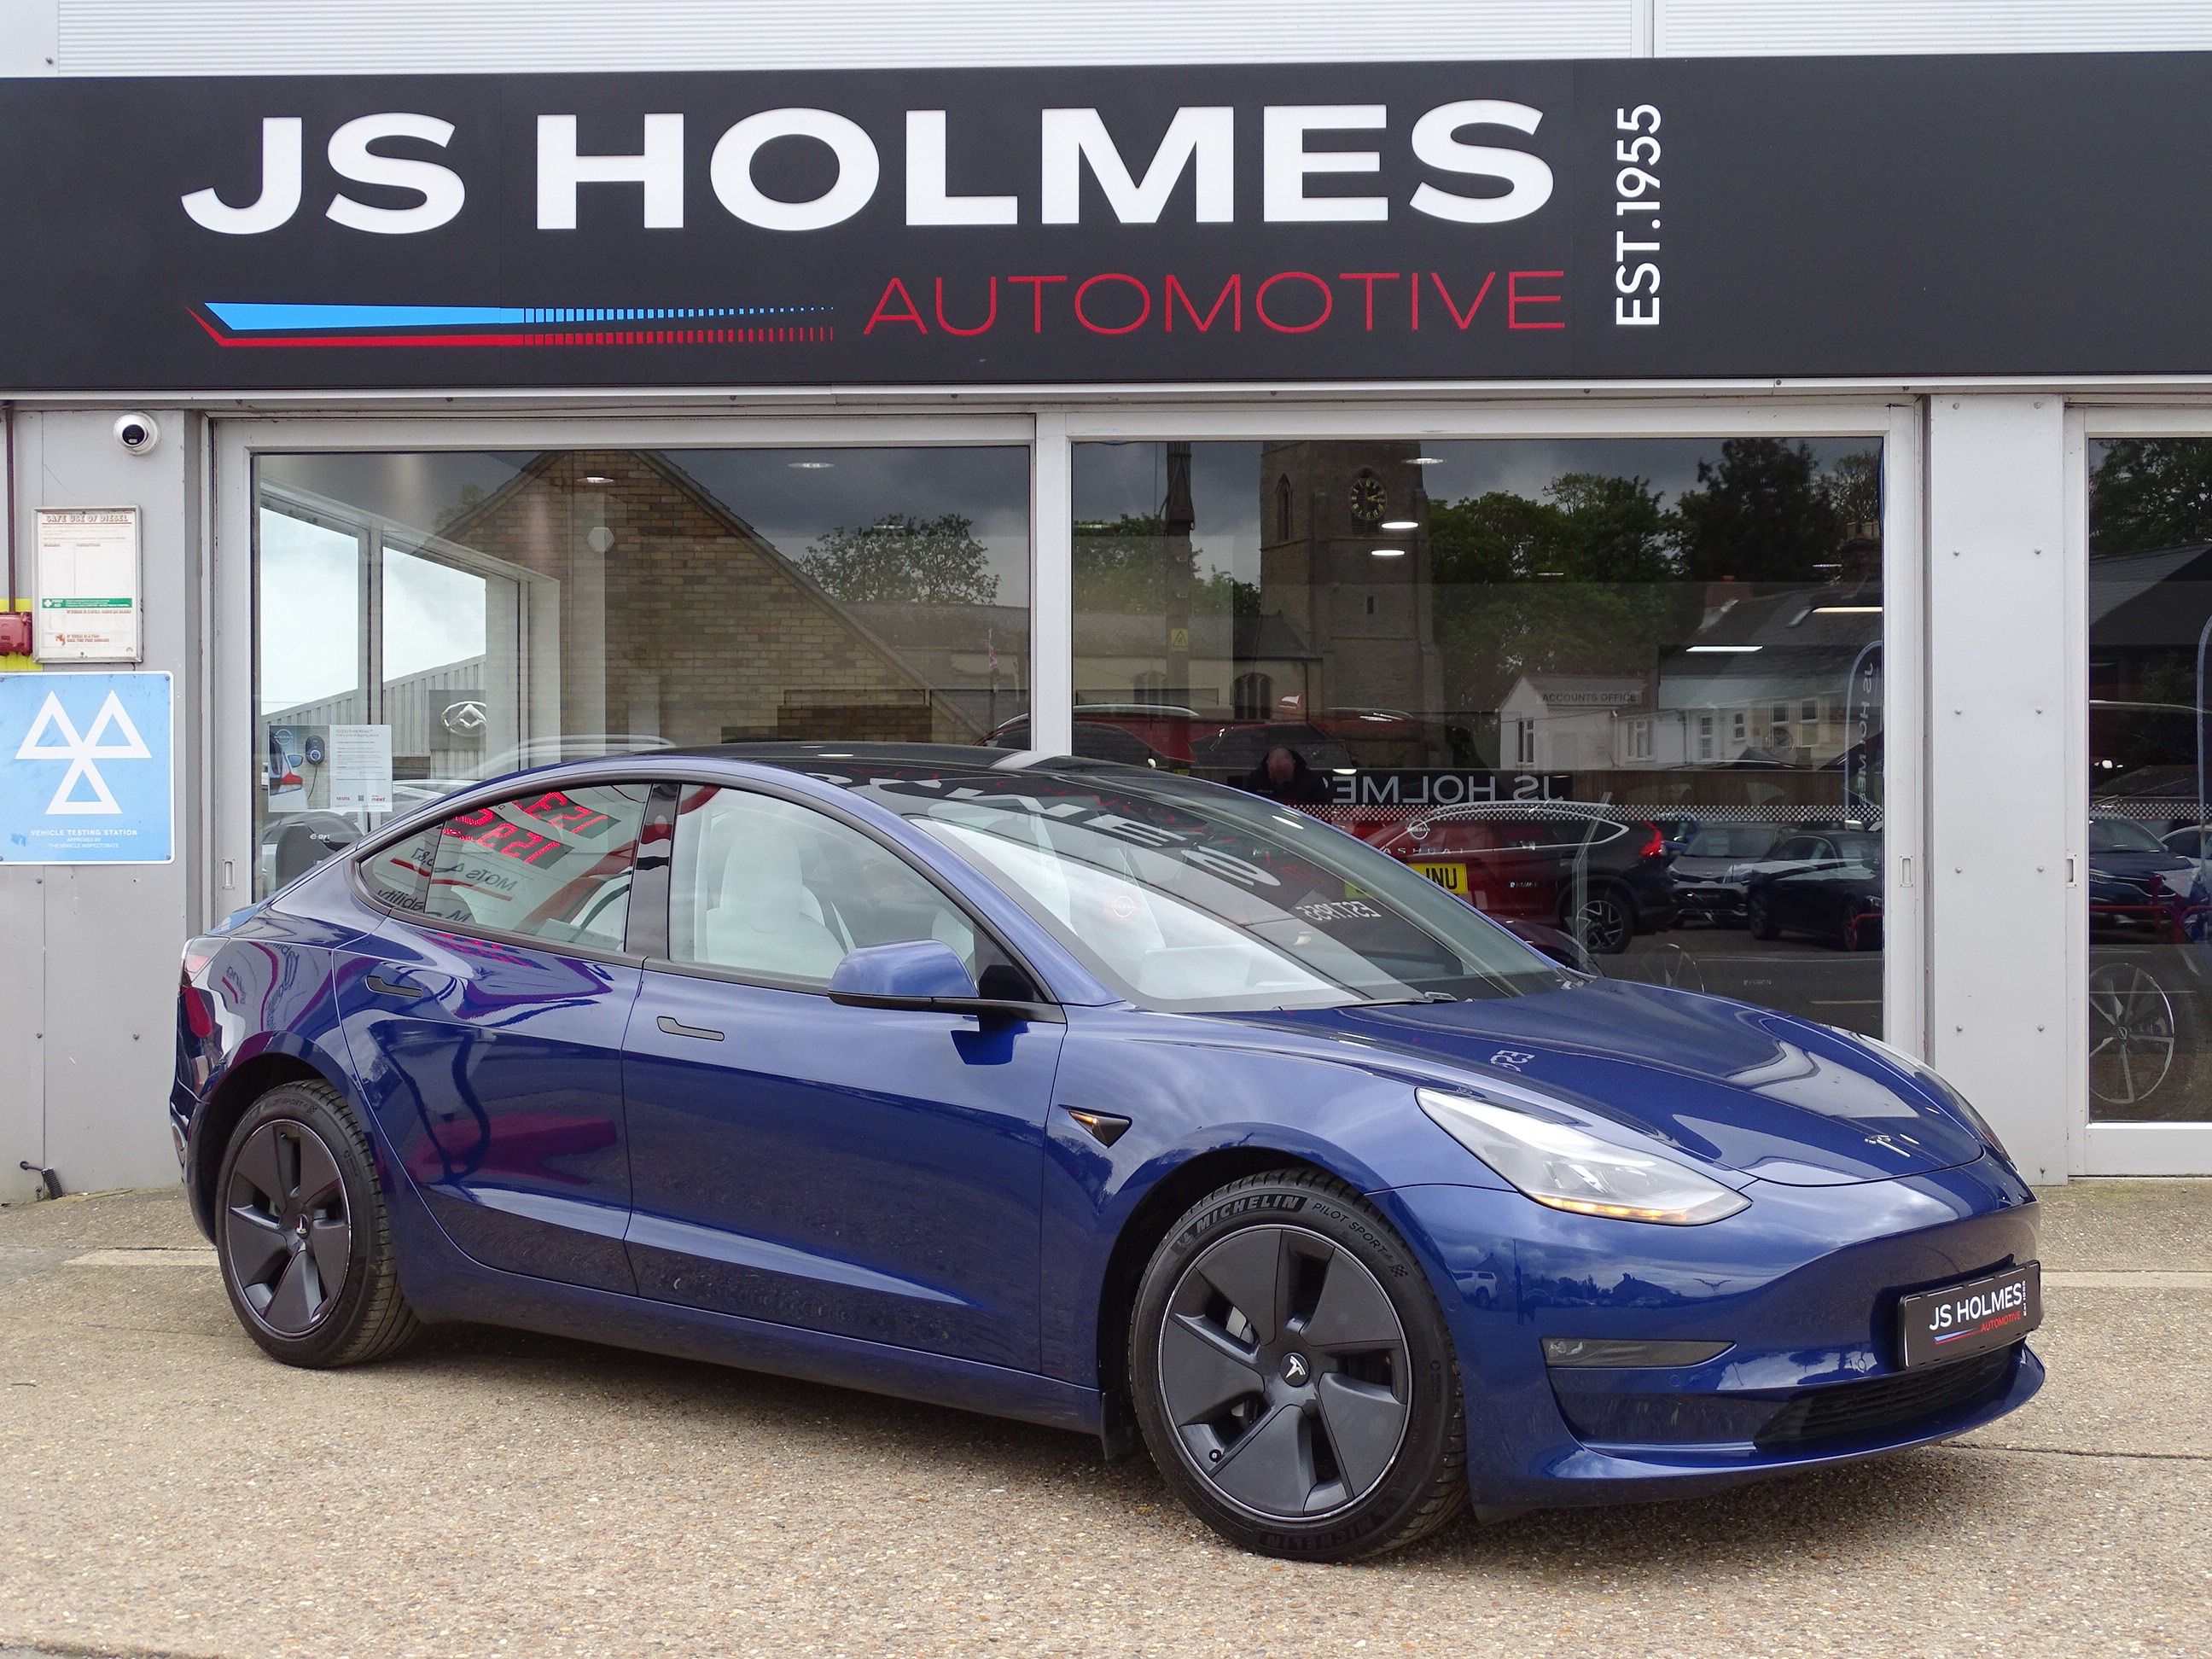 Pre Owned Electric cars at JS Holmes